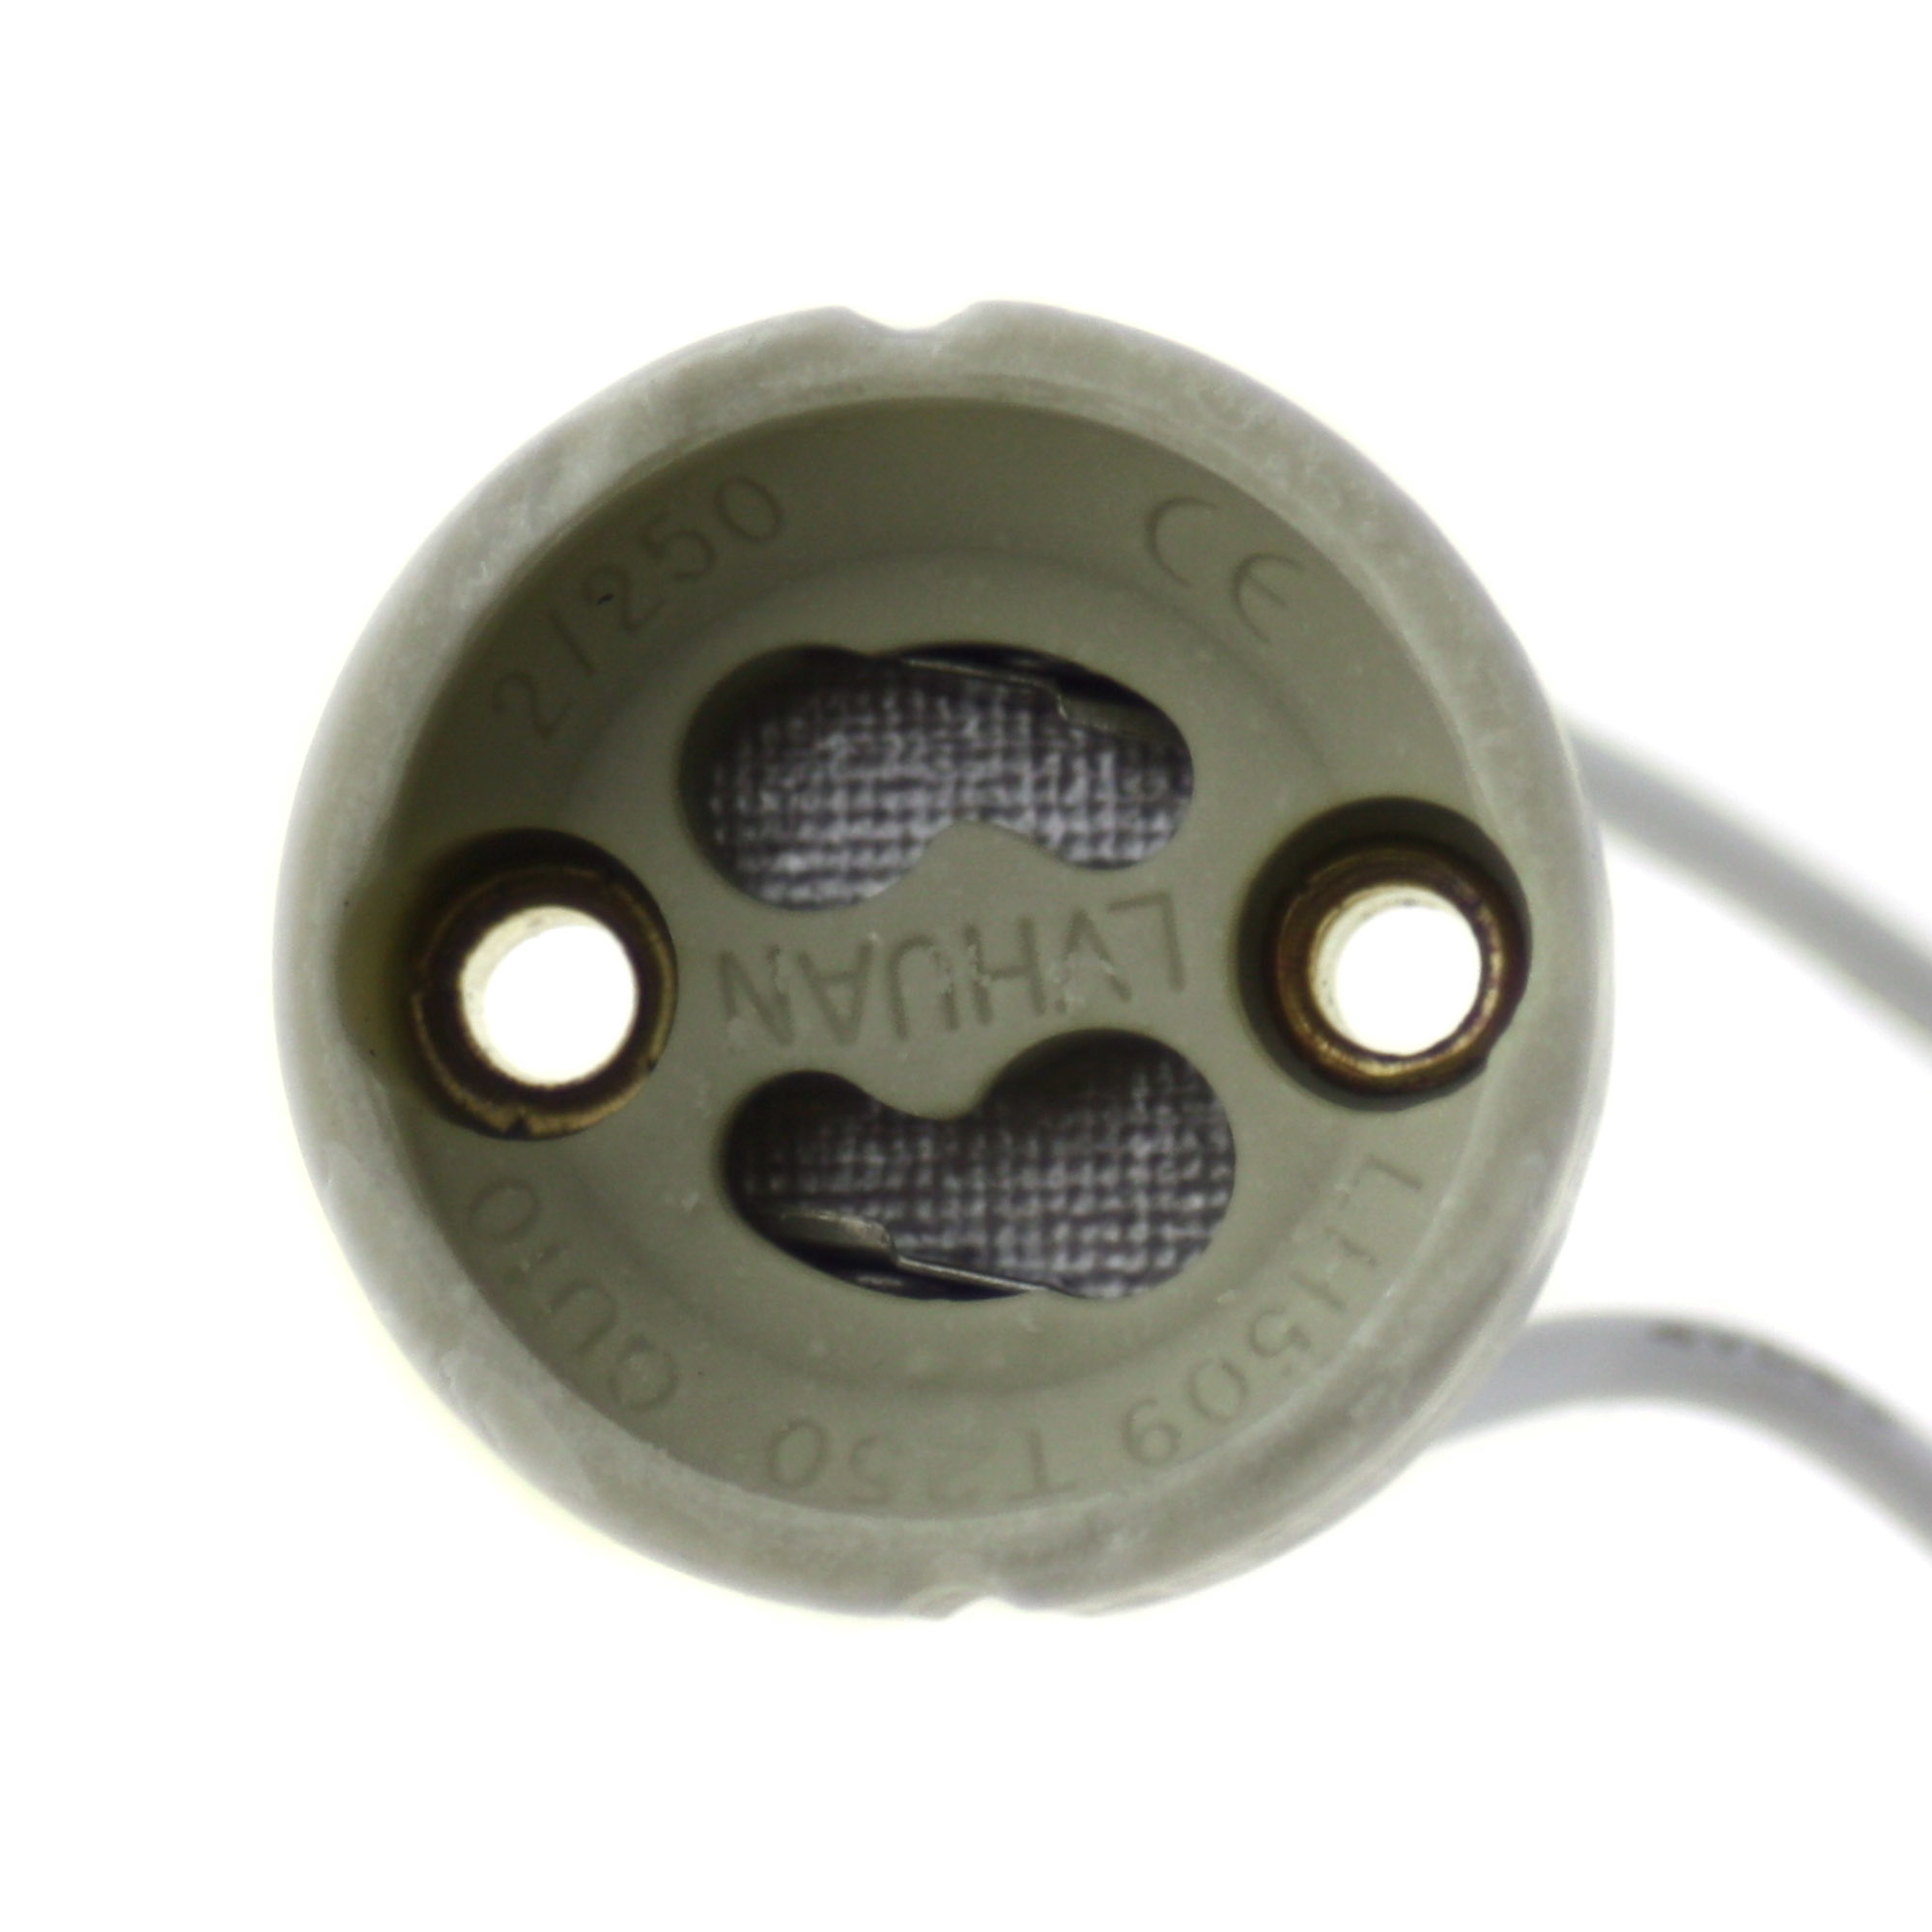 GU10 Socket with connection wire - 10PCS